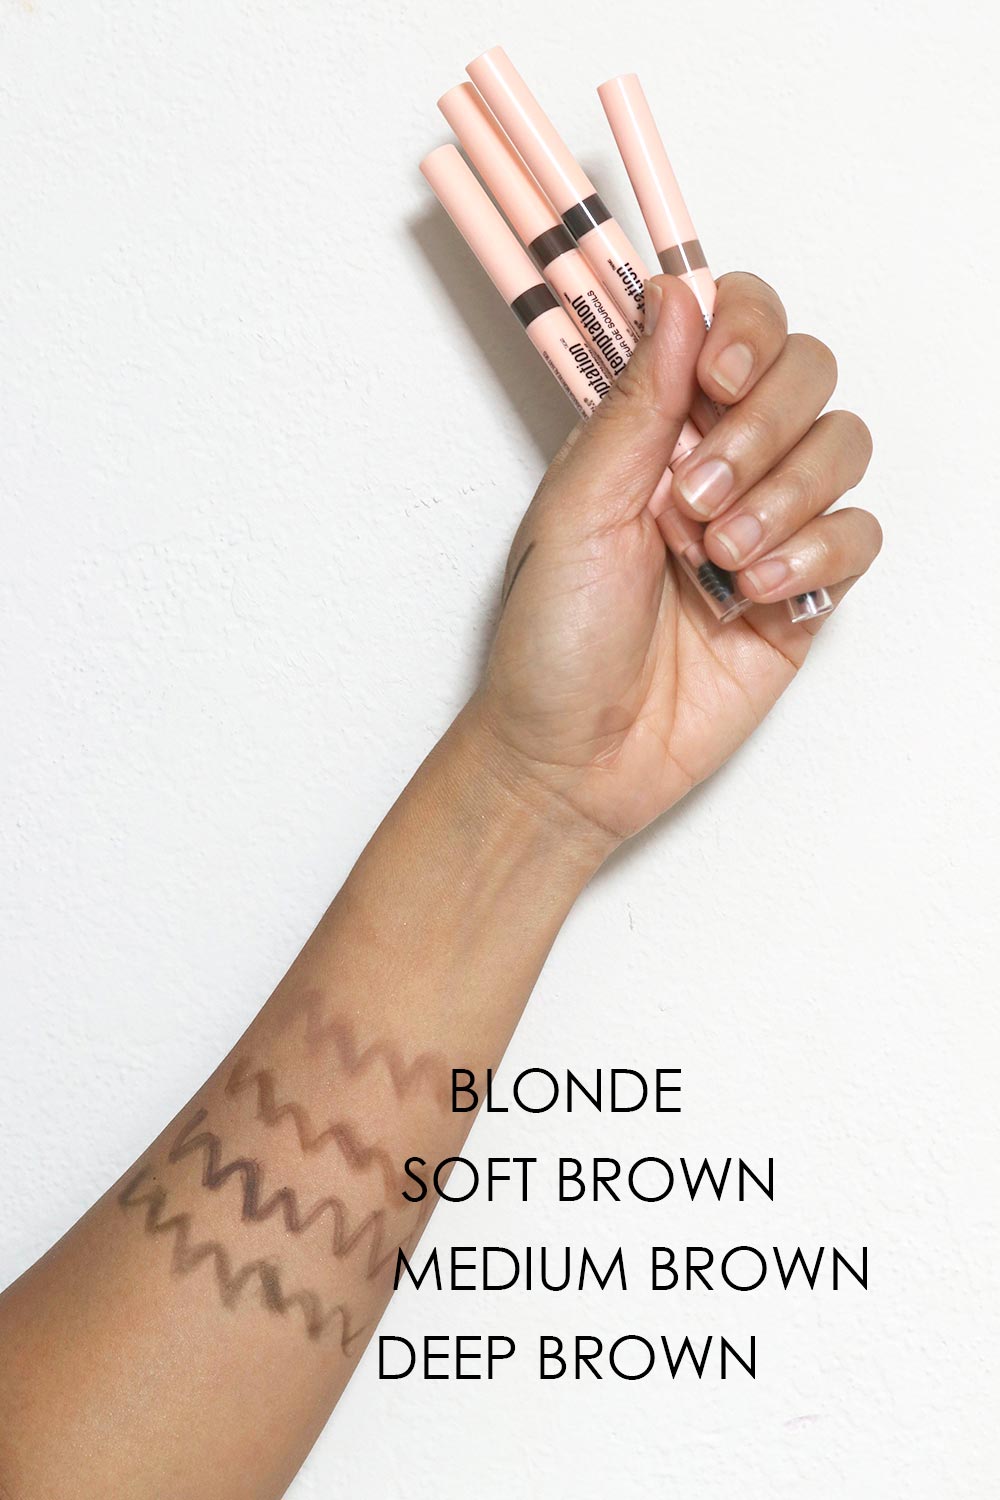 maybelline total temptation brow definer swatches